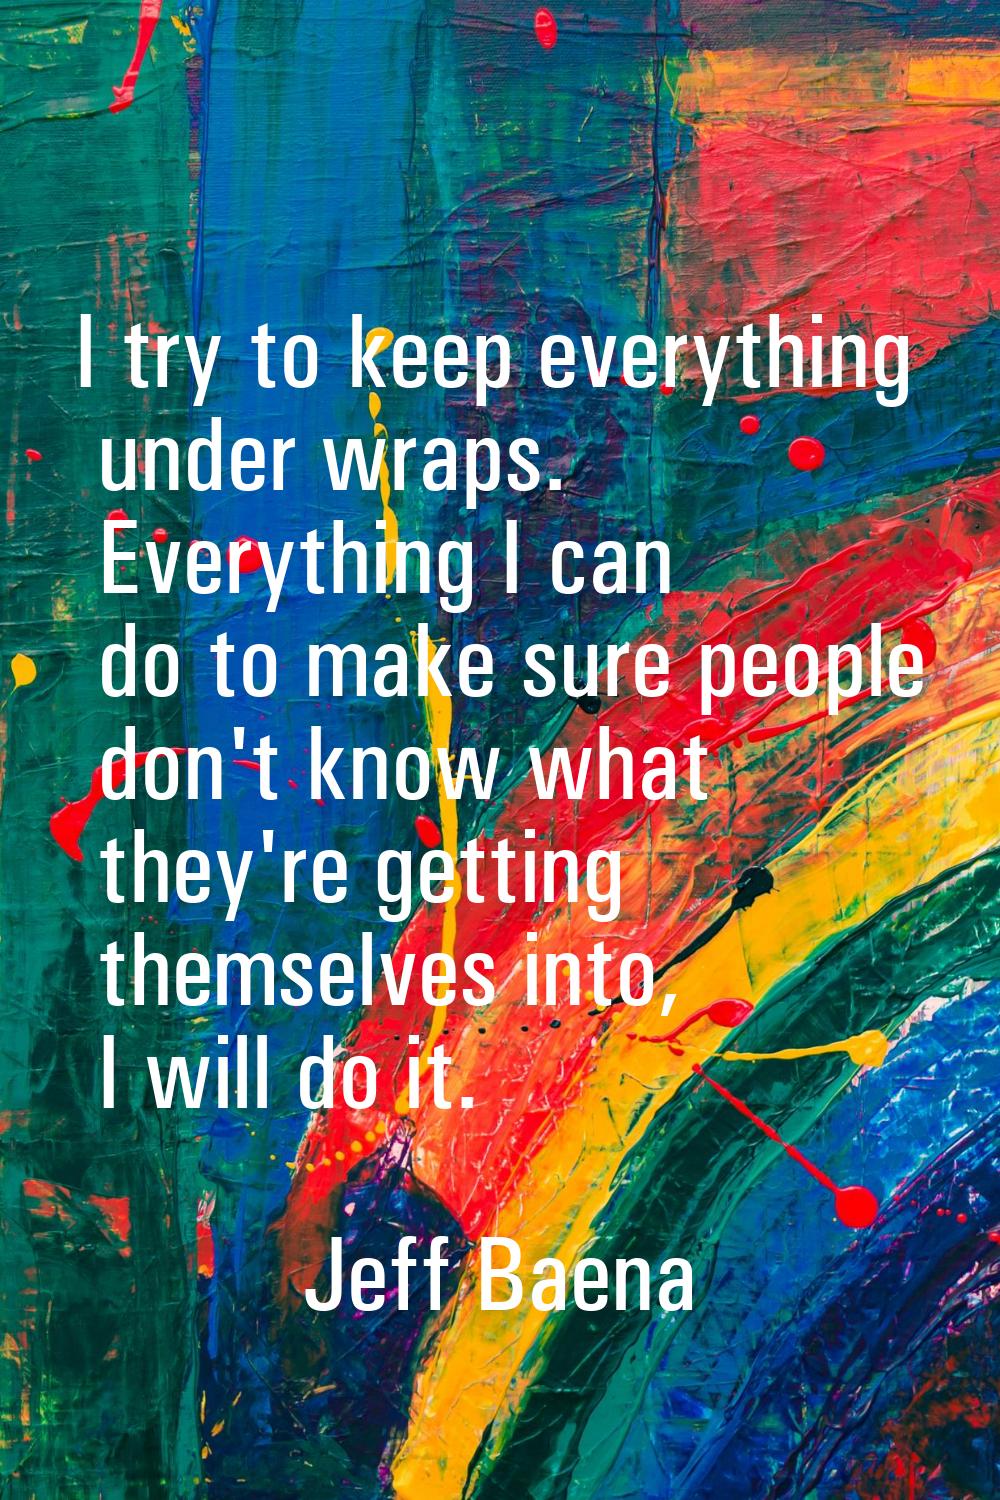 I try to keep everything under wraps. Everything I can do to make sure people don't know what they'